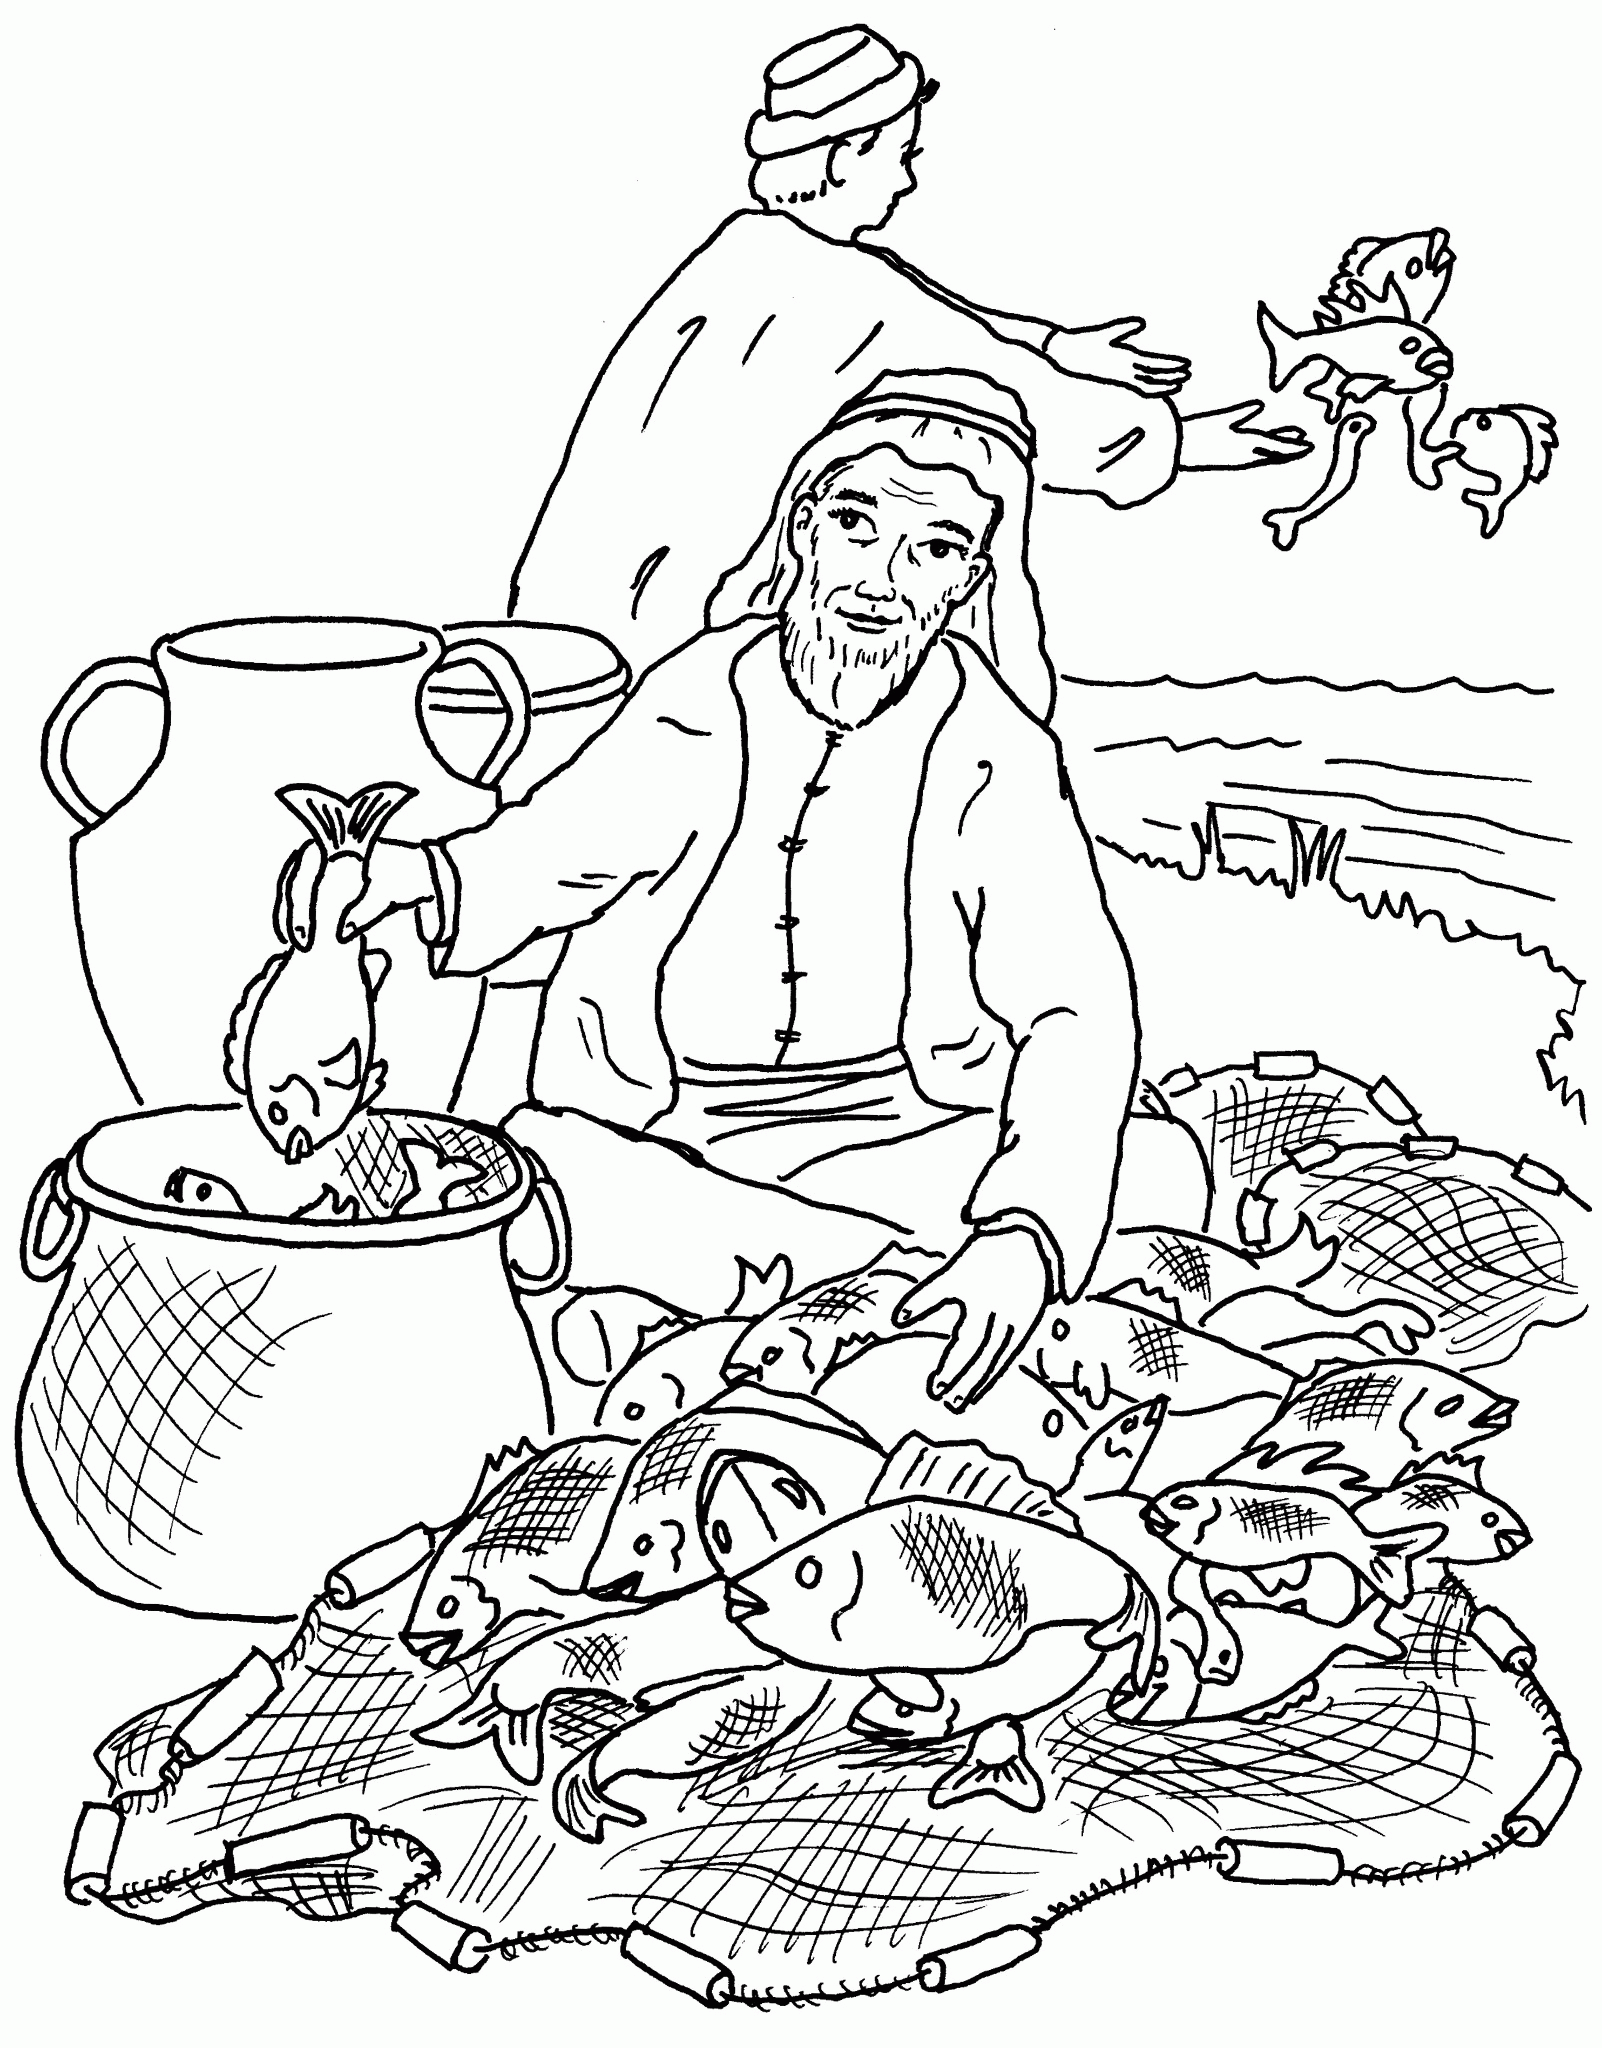 Fishers Of Men Coloring Page - Coloring Pages for Kids and for Adults